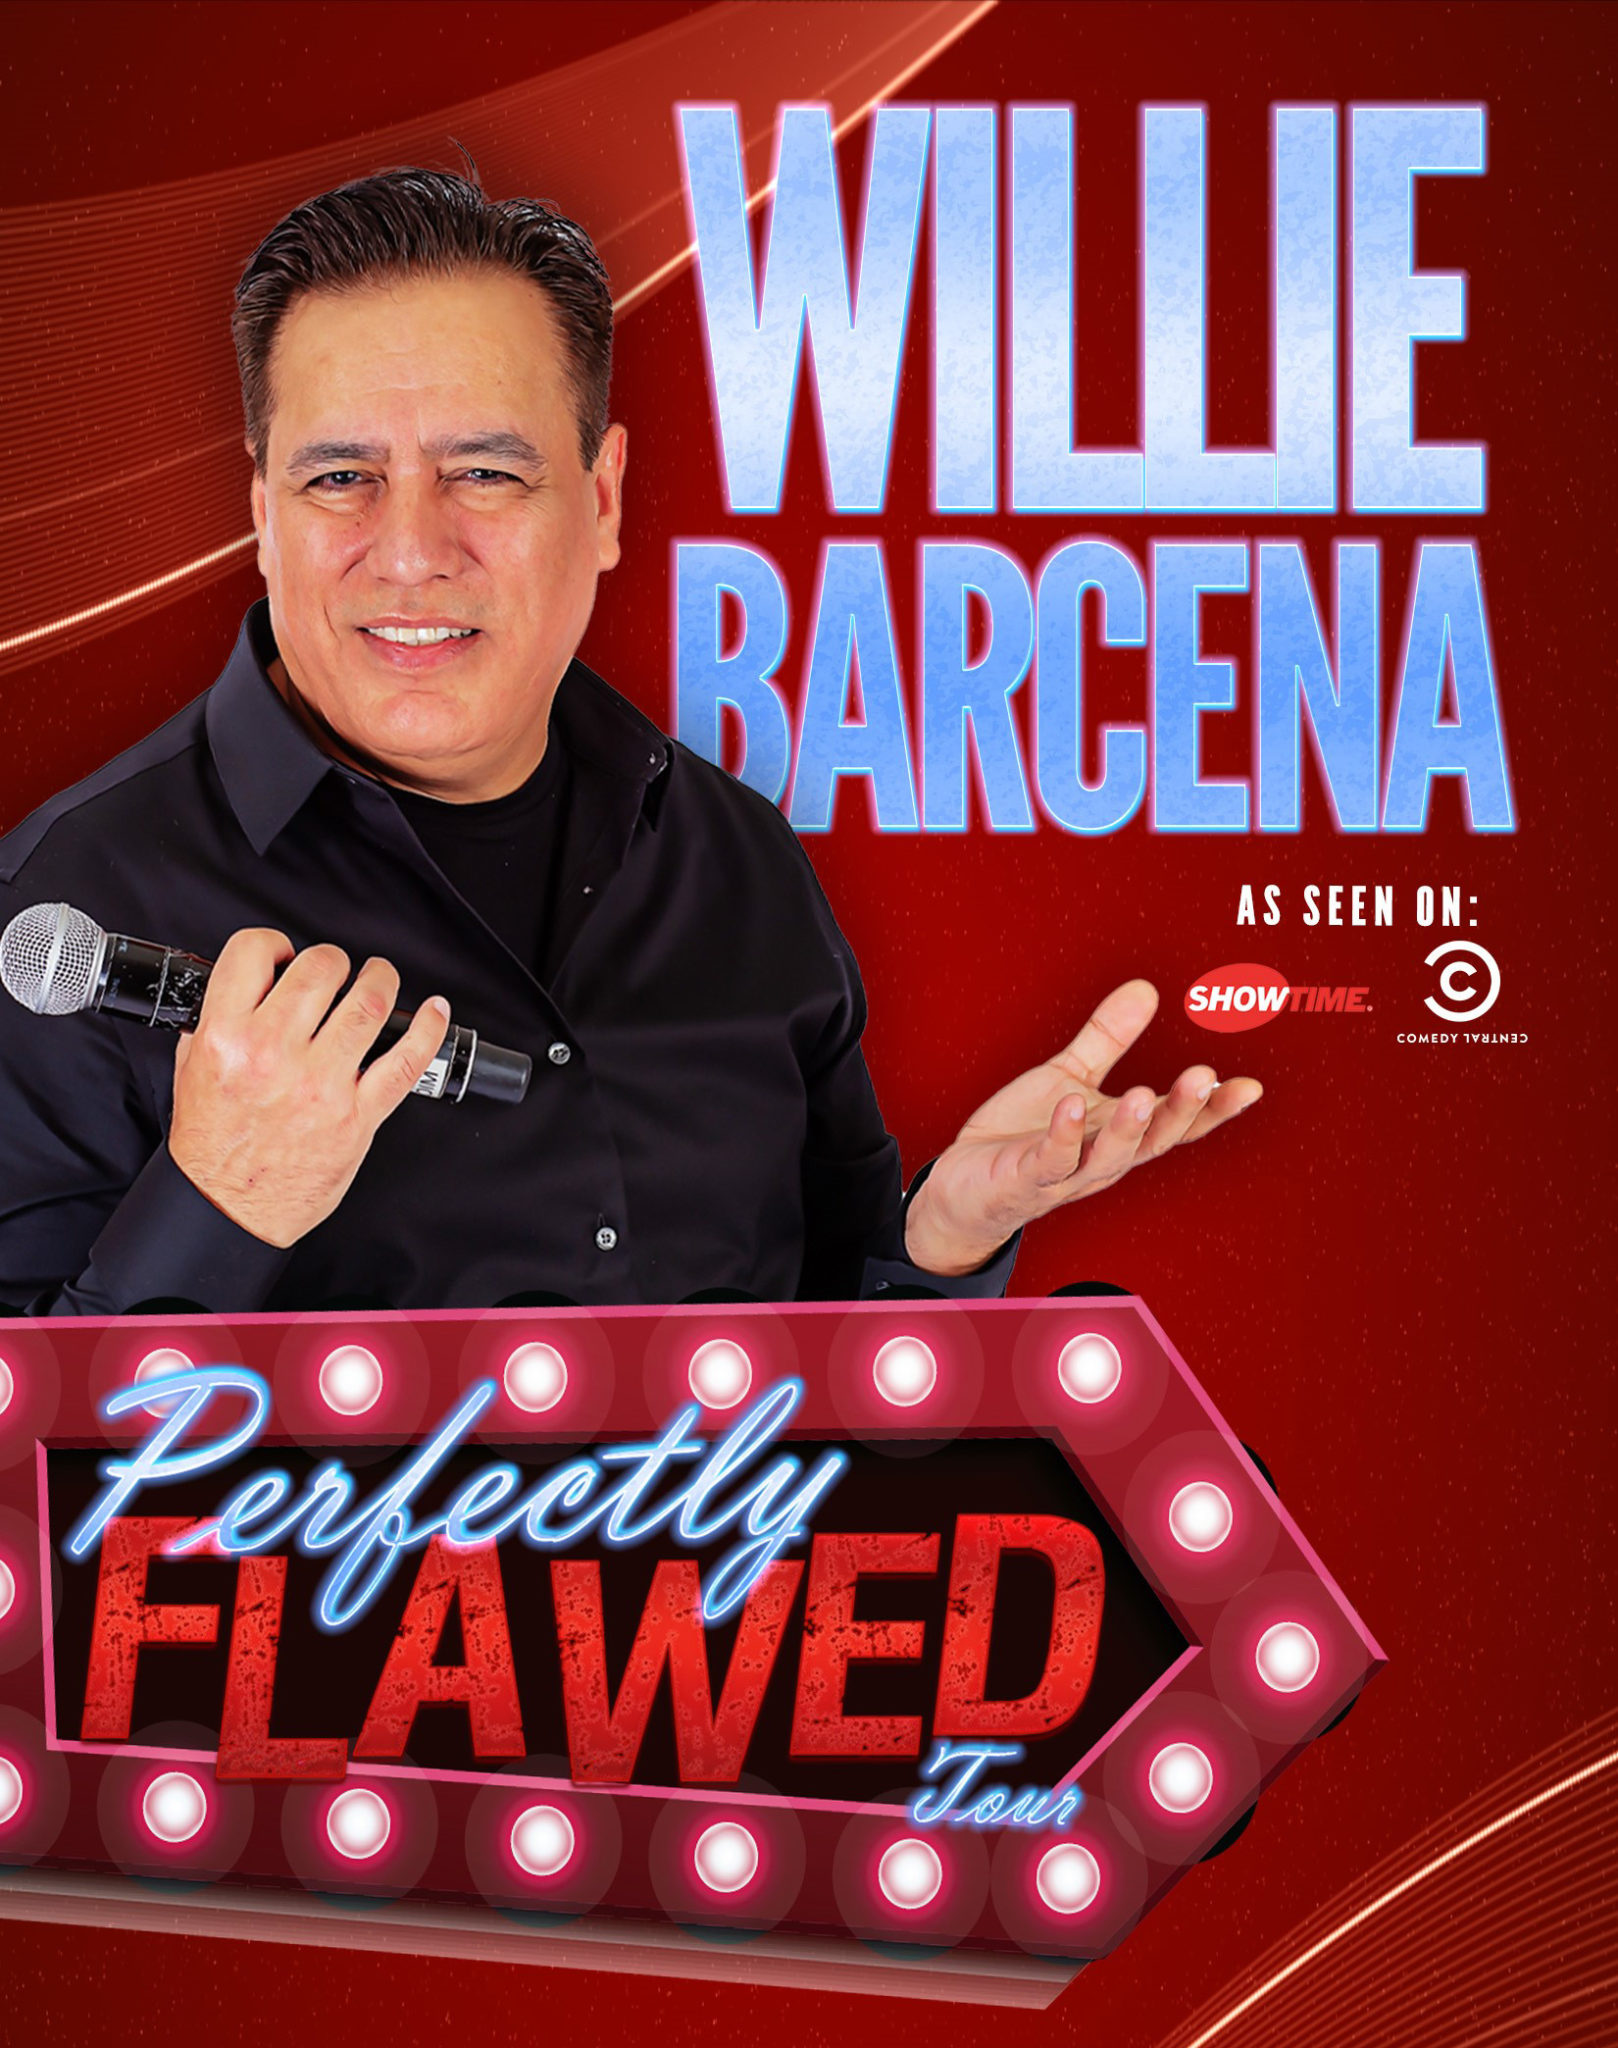 Willie Barcena Perfectly Flawed Tour Herberger Theater Center